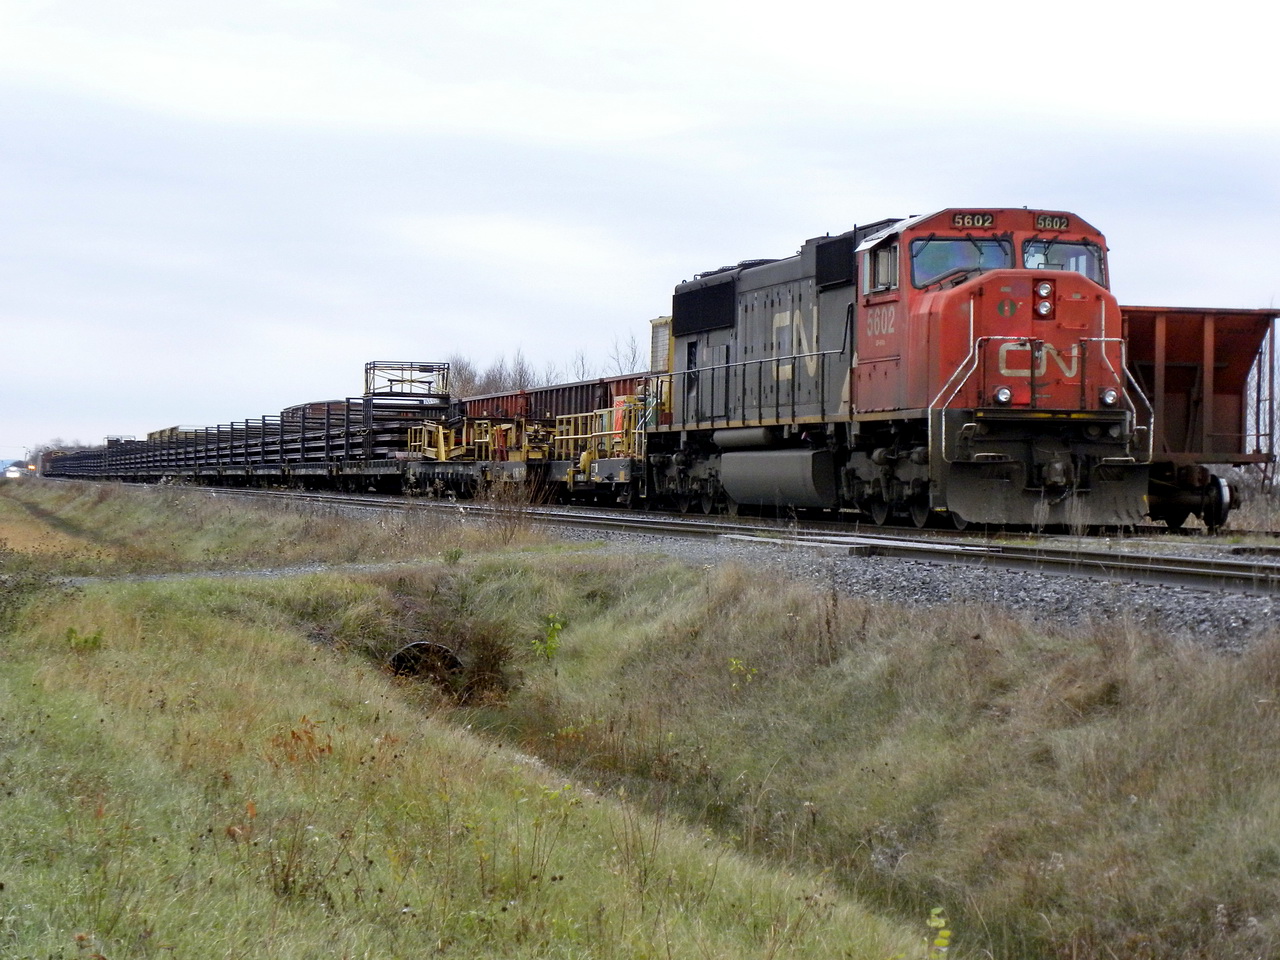 CN 480 will lay new rails on the 25 mile Bec sub.